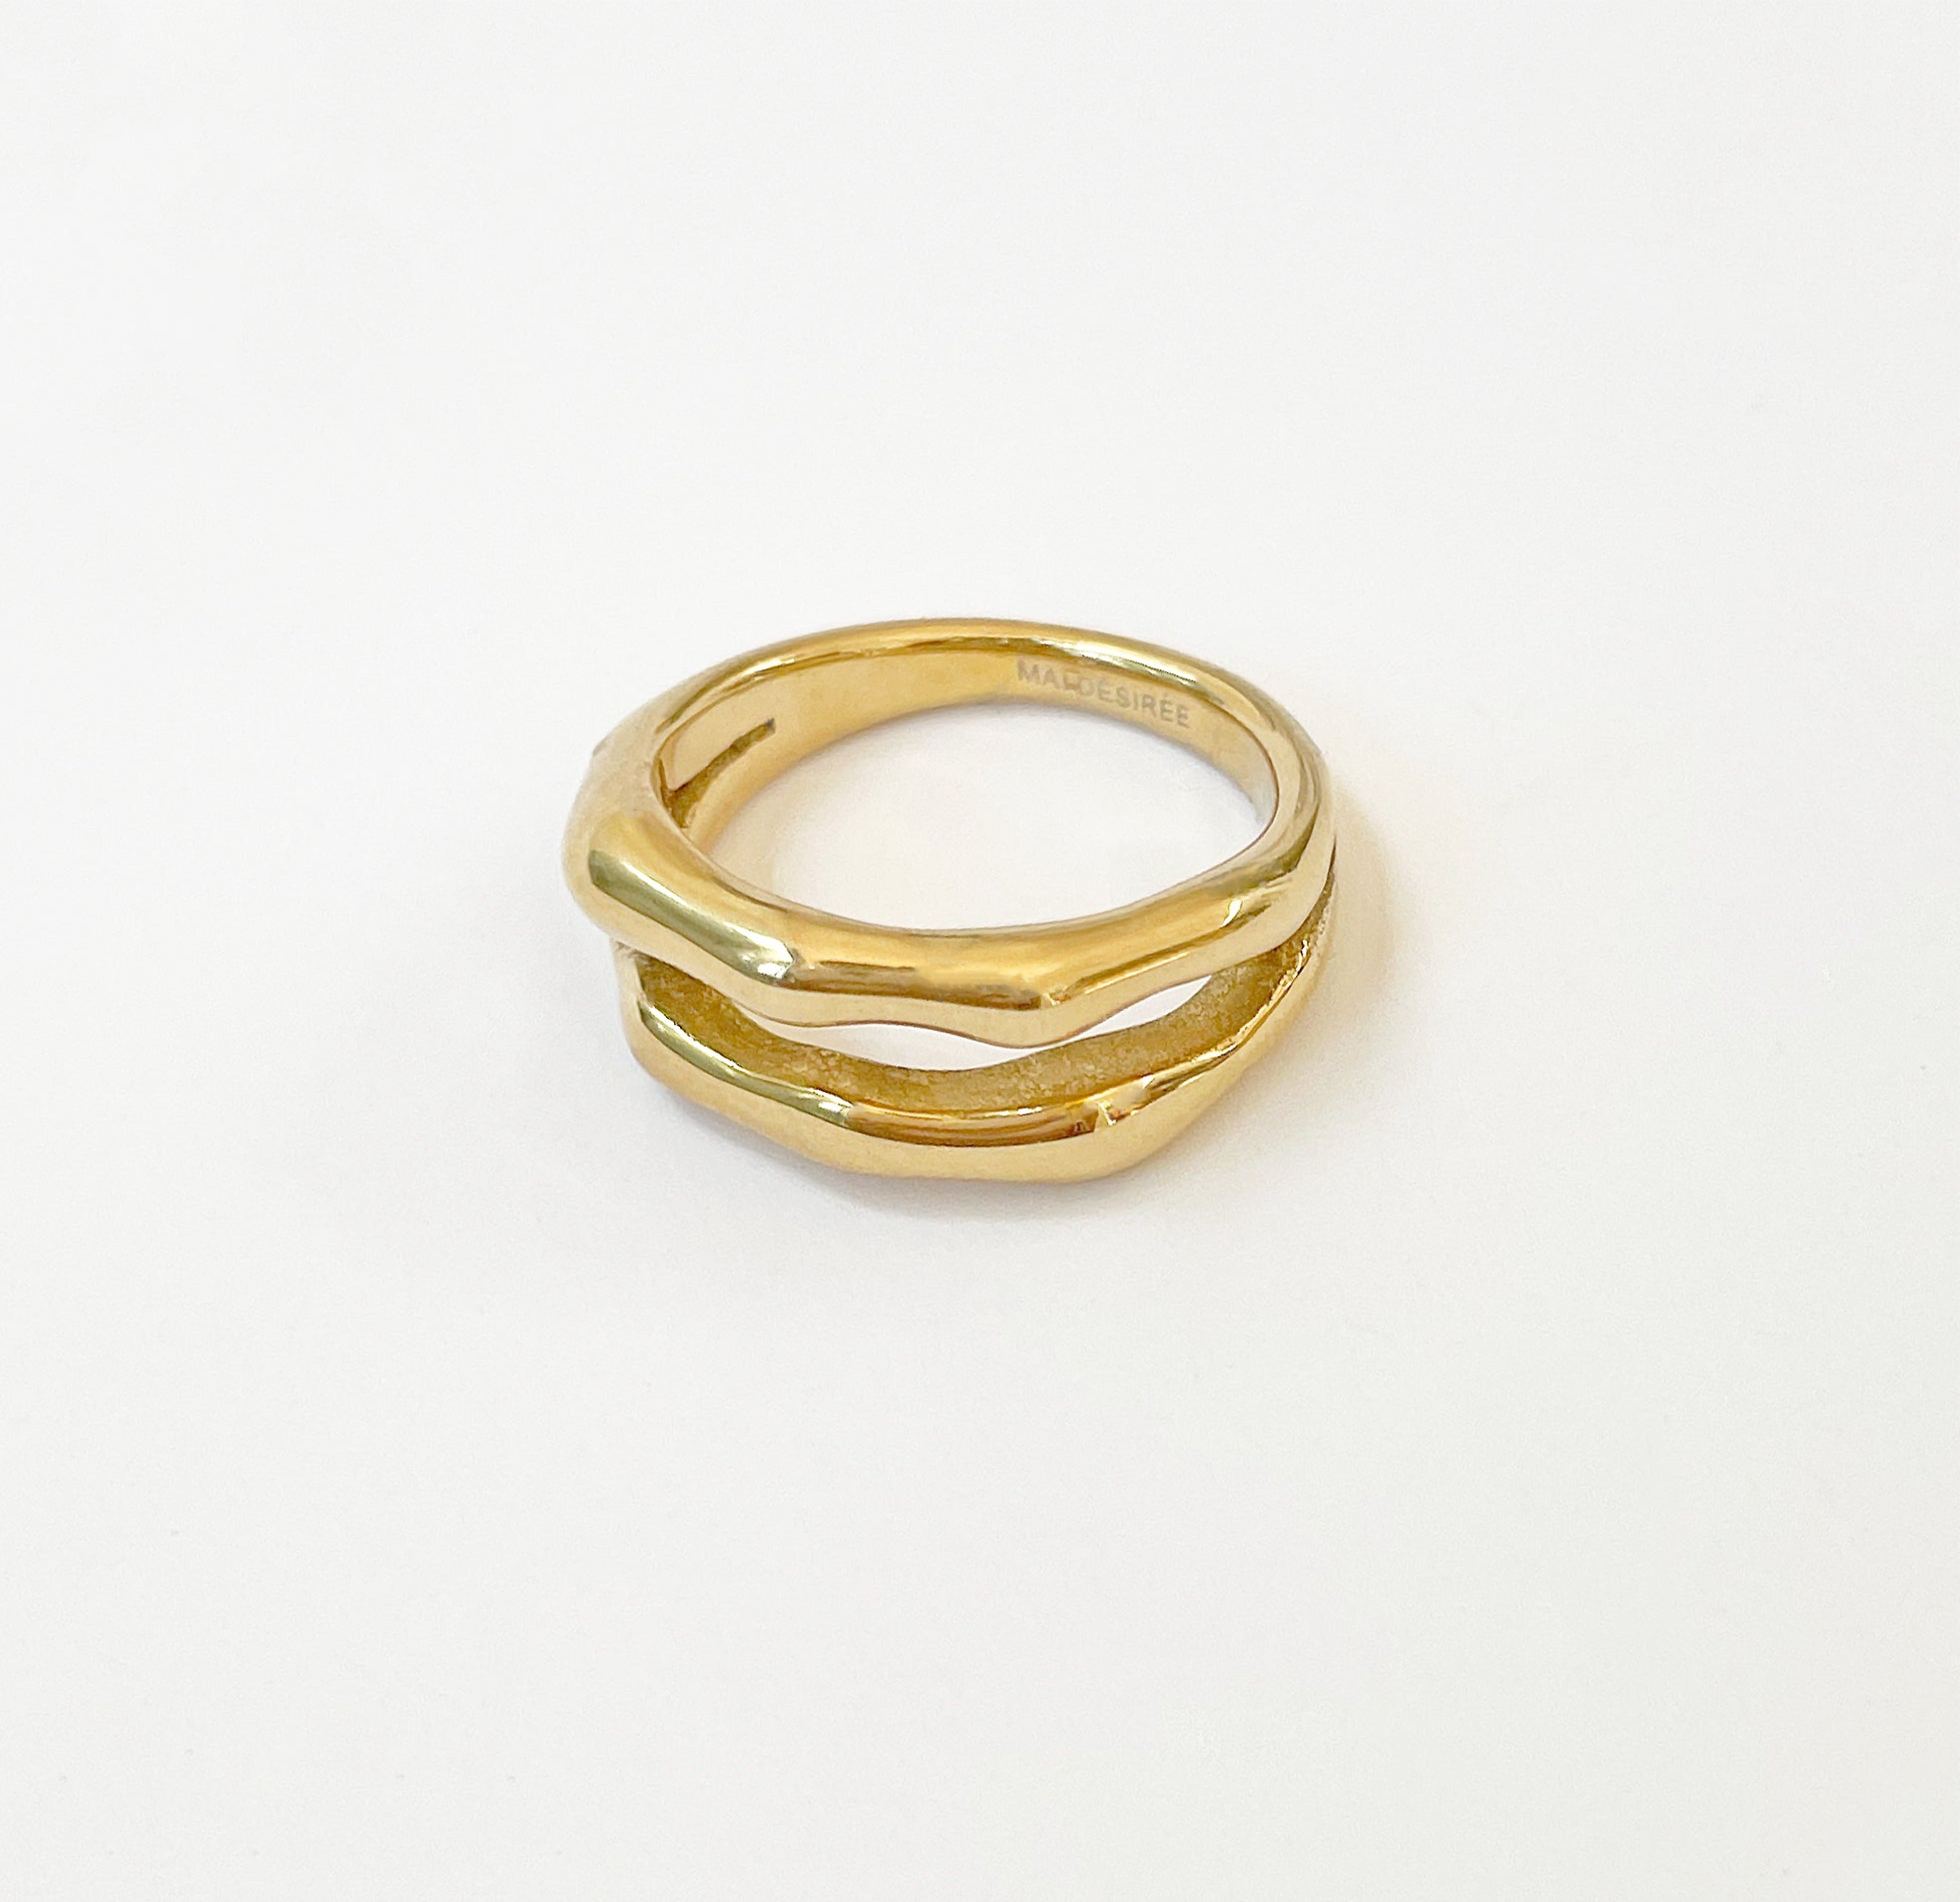 HALLIE GOLD DOUBLE BAMBOO BAND RING SAMPLE